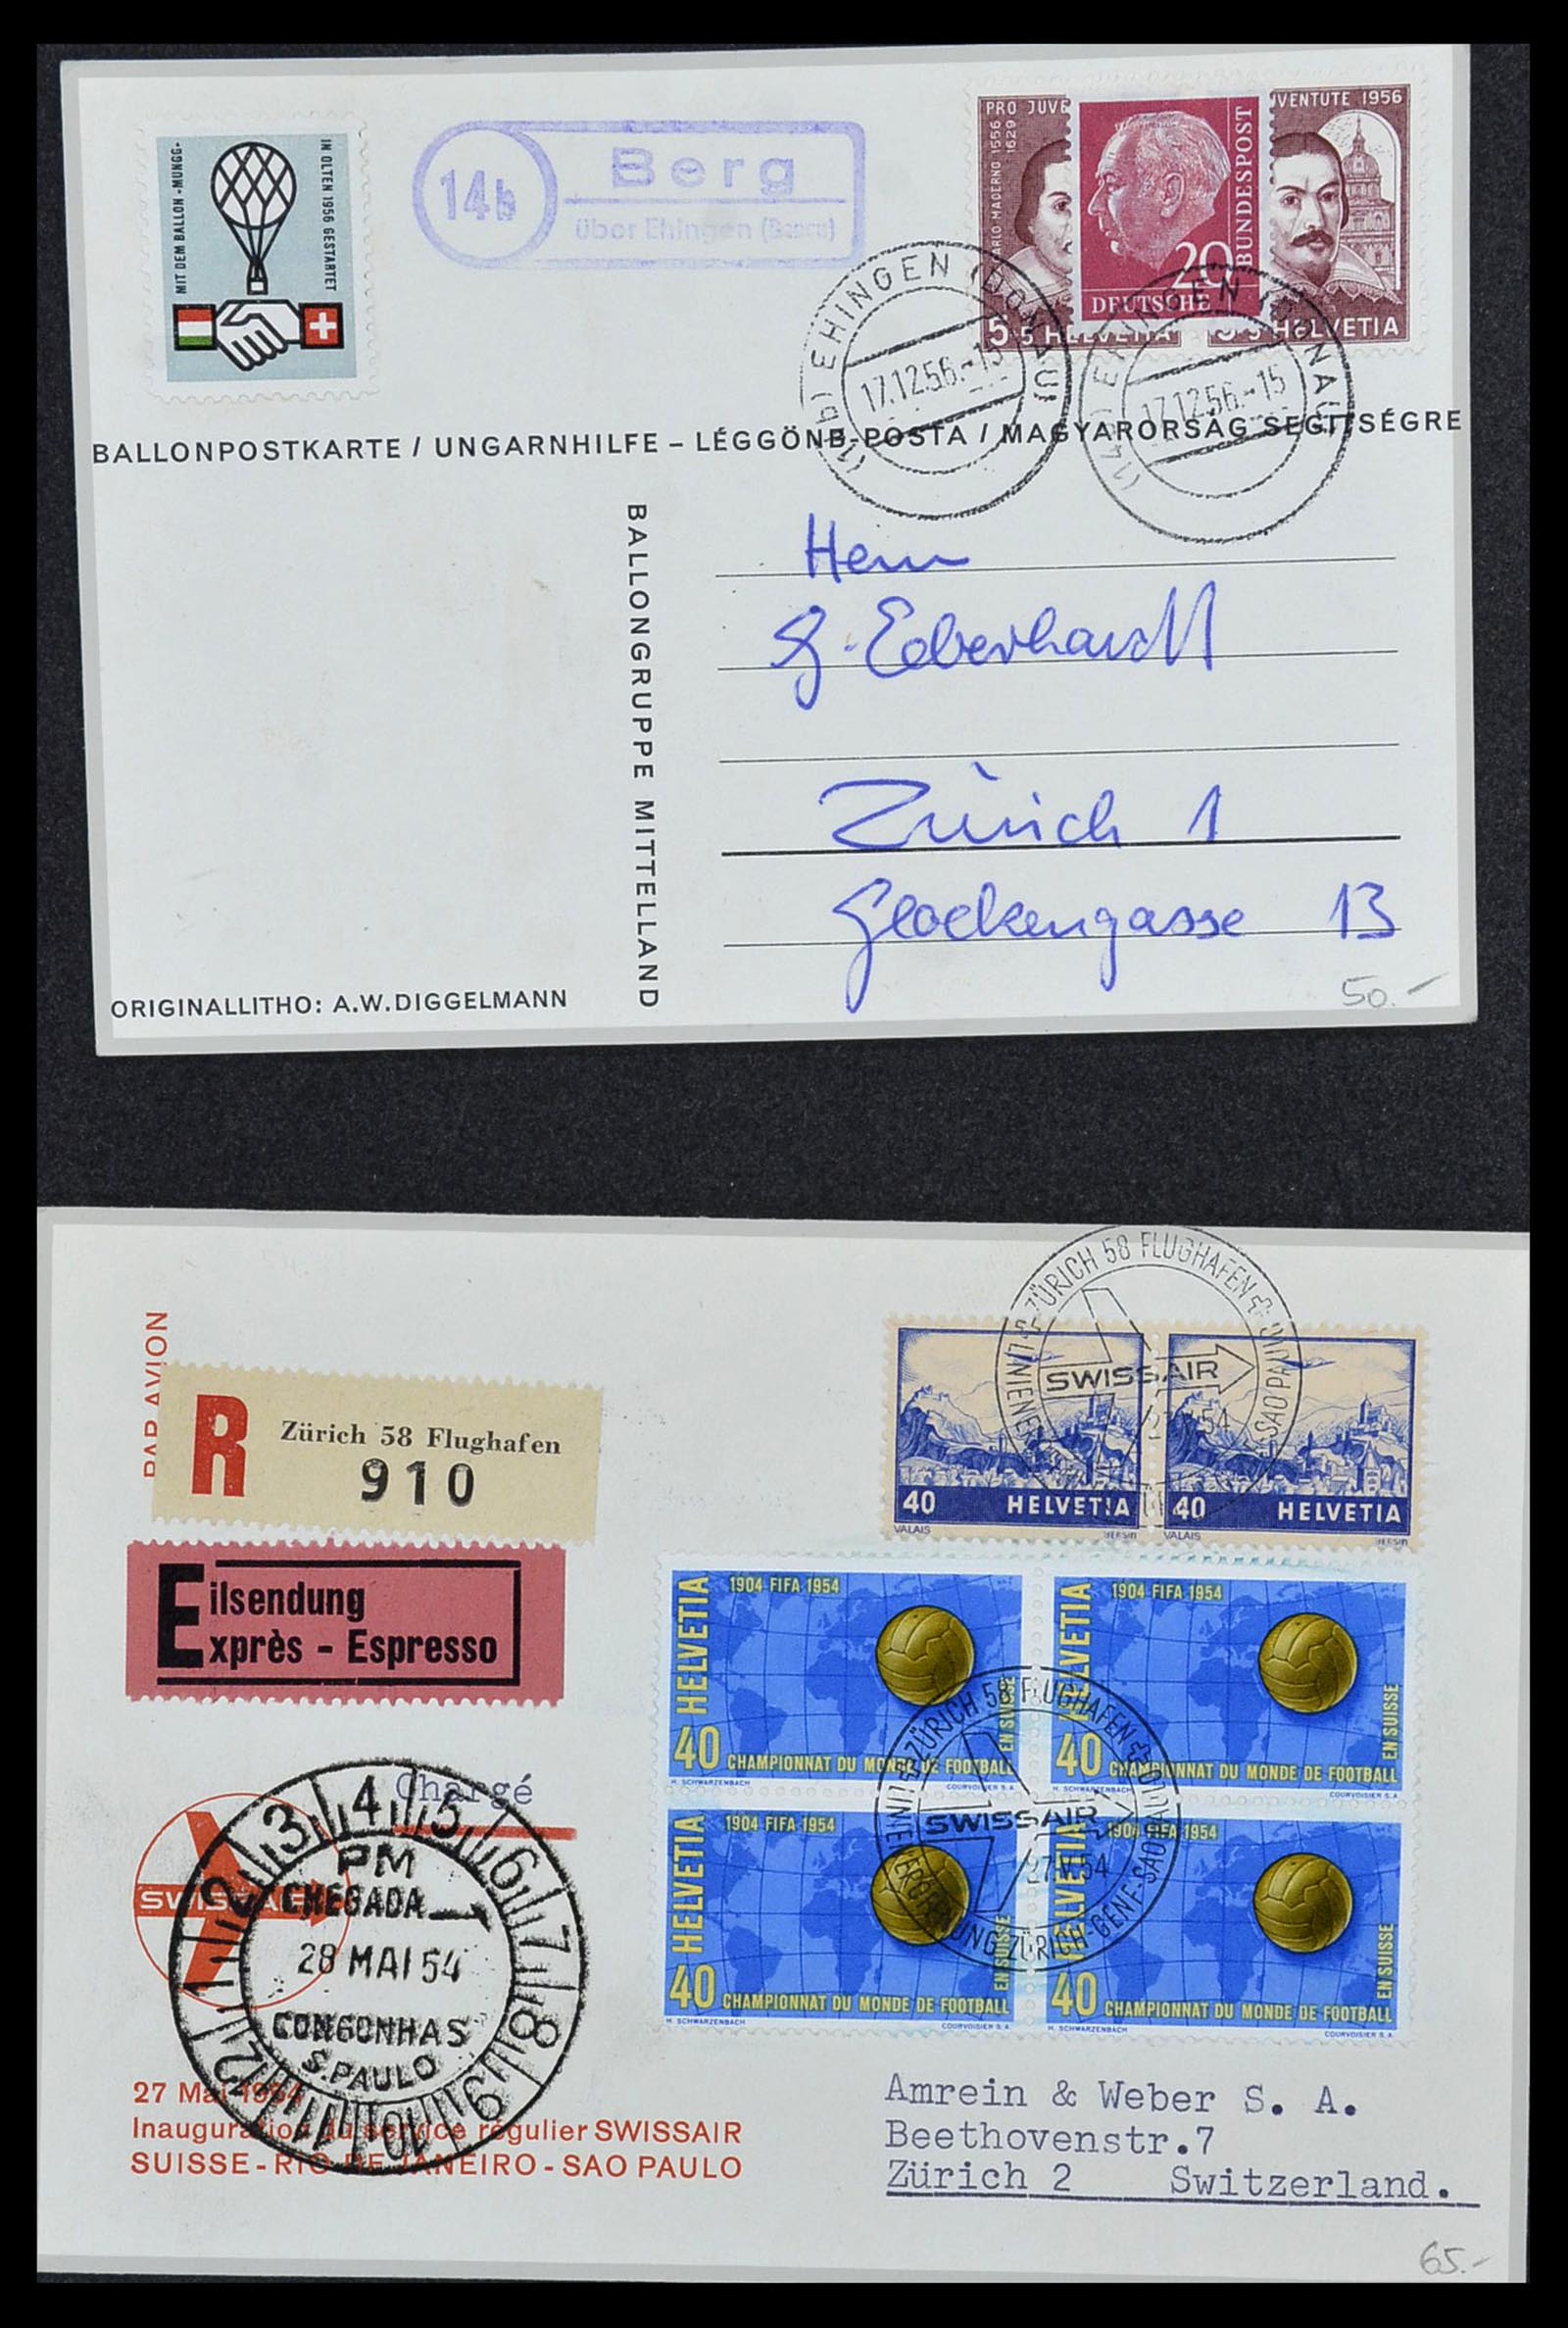 34141 029 - Stamp collection 34141 Switzerland airmail covers 1920-1960.